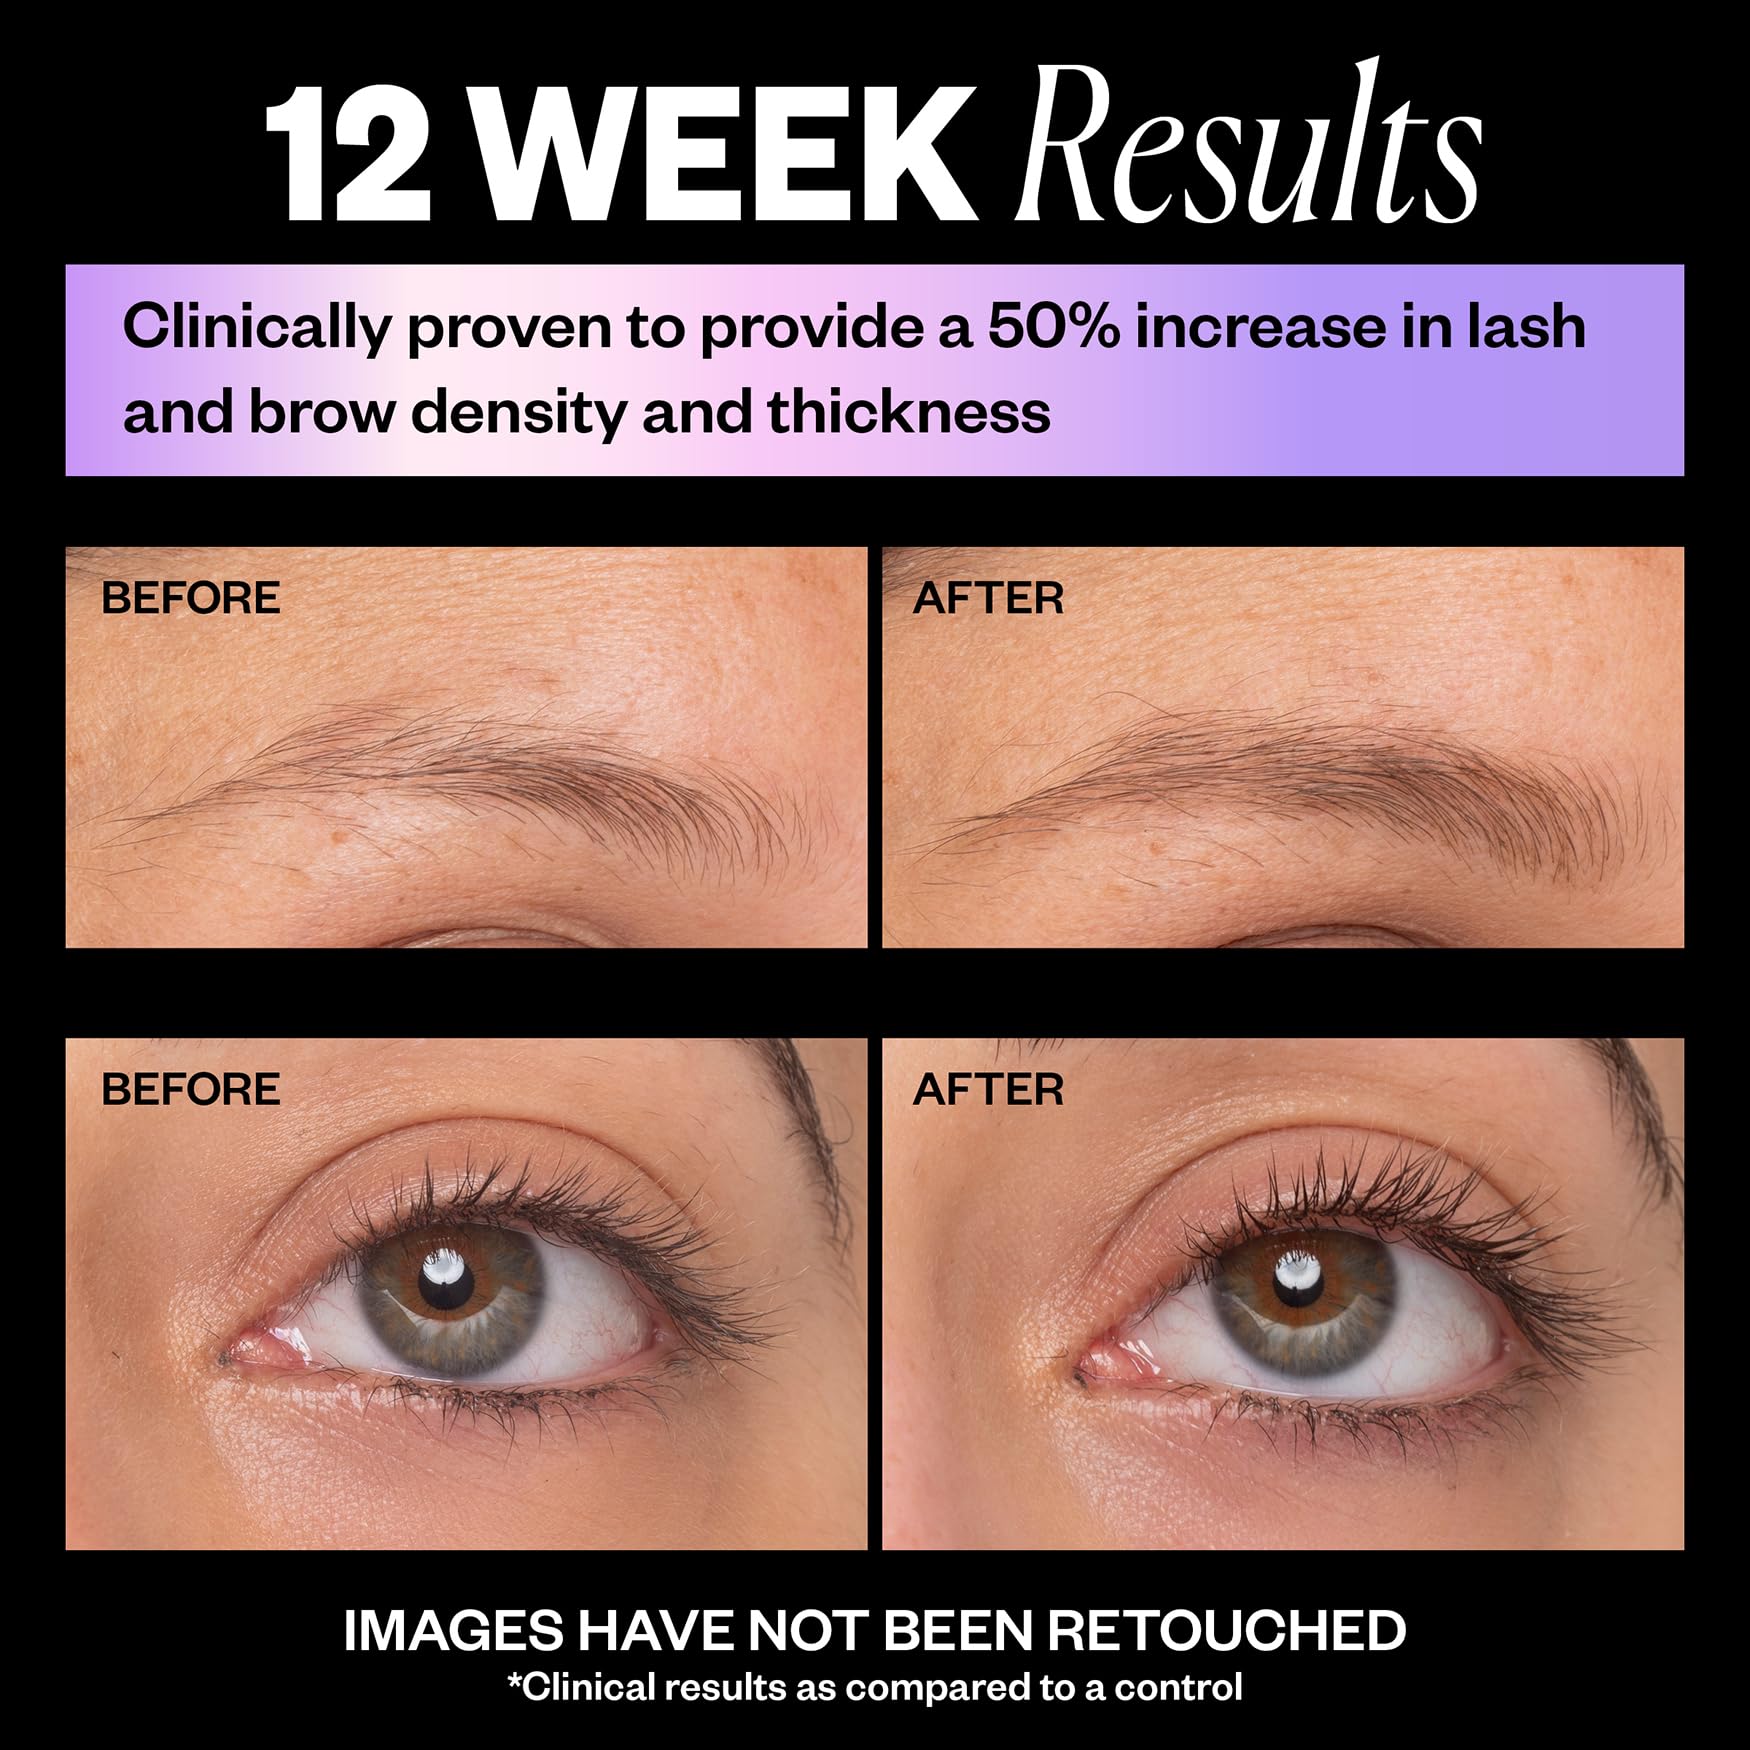 IGK Look Out Lash and Brow Boosting Peptide Serum | Increases Thickness + Fullness + Density of Brows and Lashes | Dermatologist + Ophthalmologist Approved | Vegan + Cruelty-Free | 0.11 Fl Oz